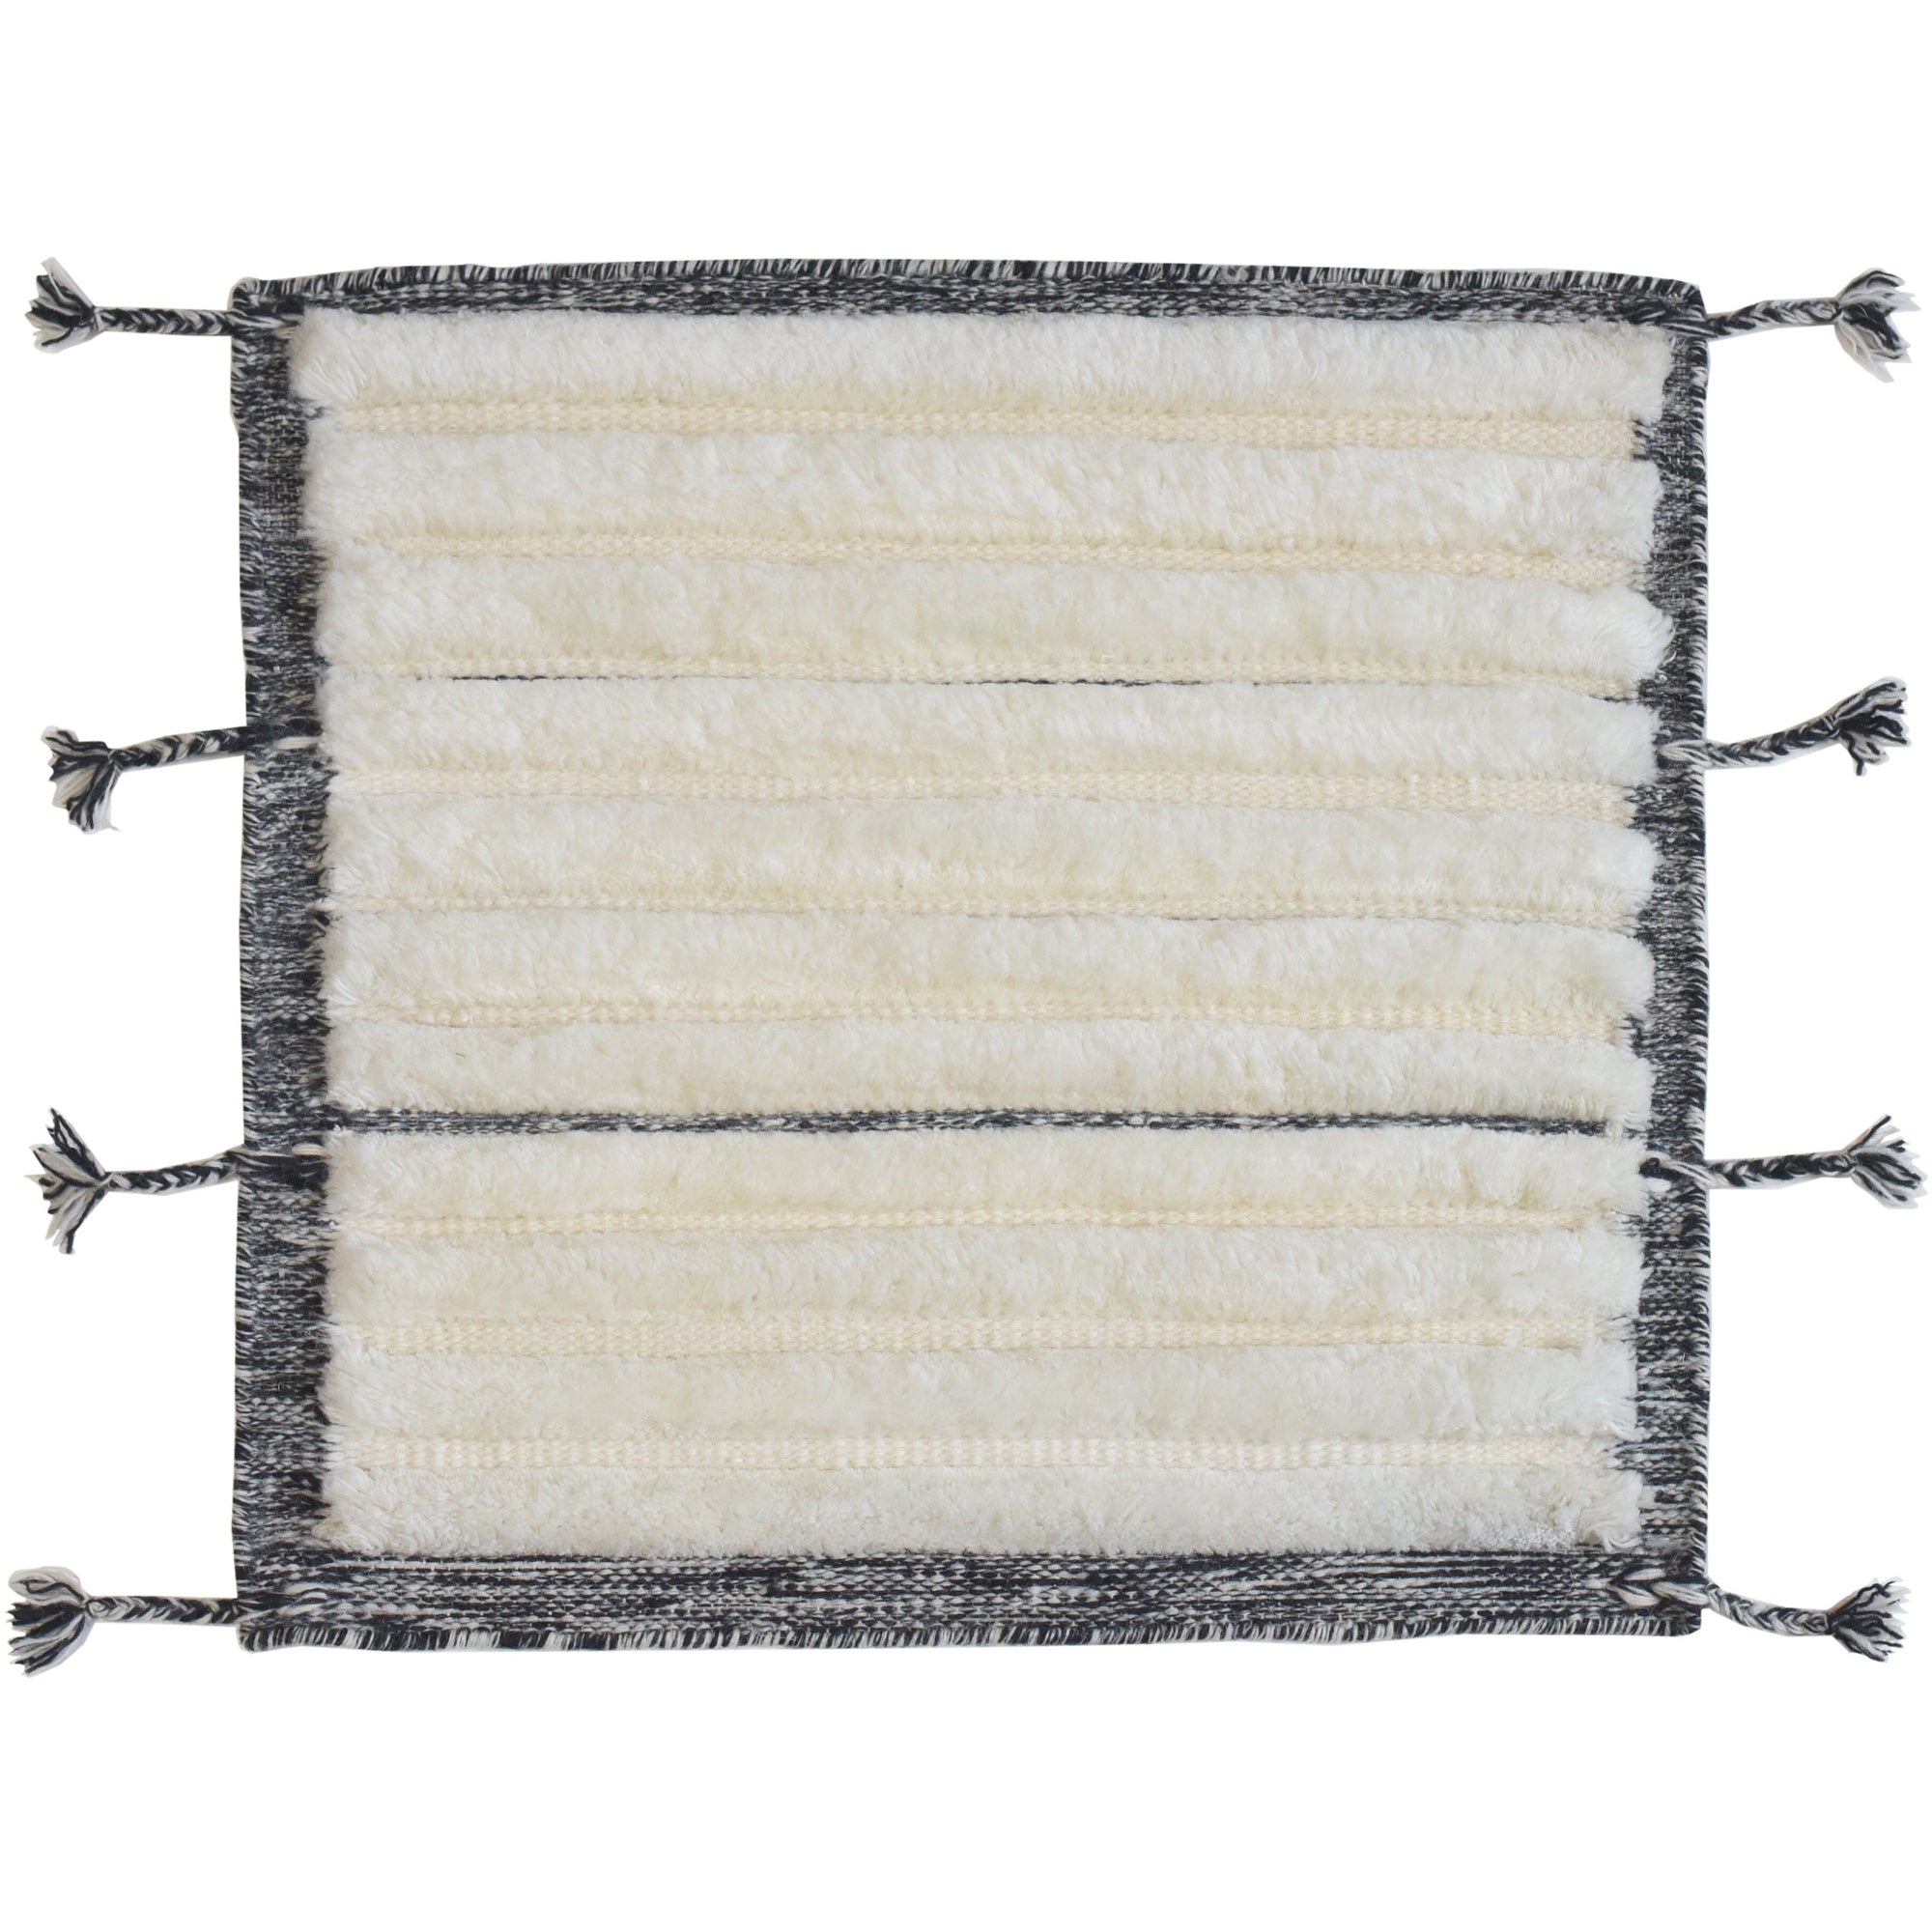 Taylor Ivory/Black Border Wool Handknotted with Shag Pile SAMPLE Rugs Organic Weave Shop 18"x18" Ivory/Black 